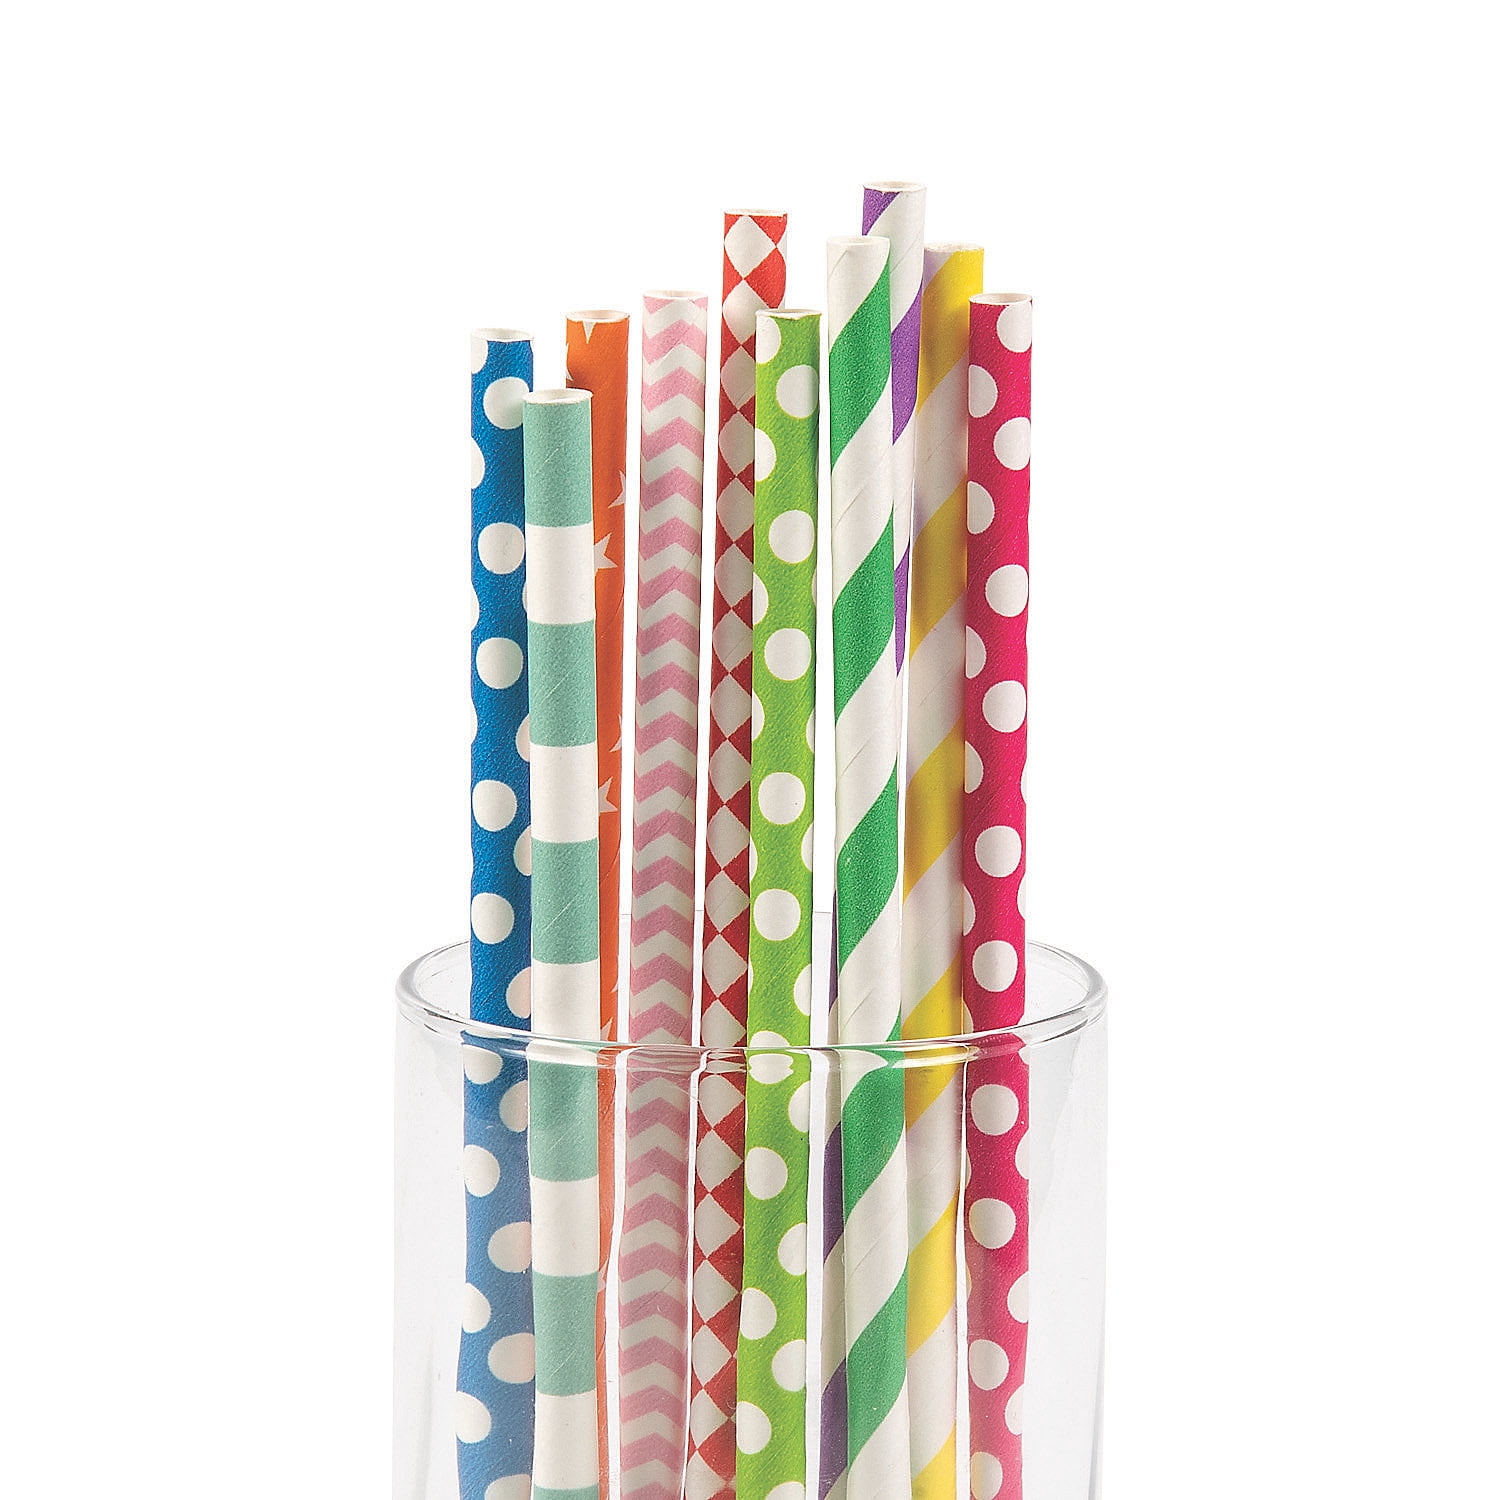 1-pack Good Living 100-Count Party Straws in Assorted Colors 